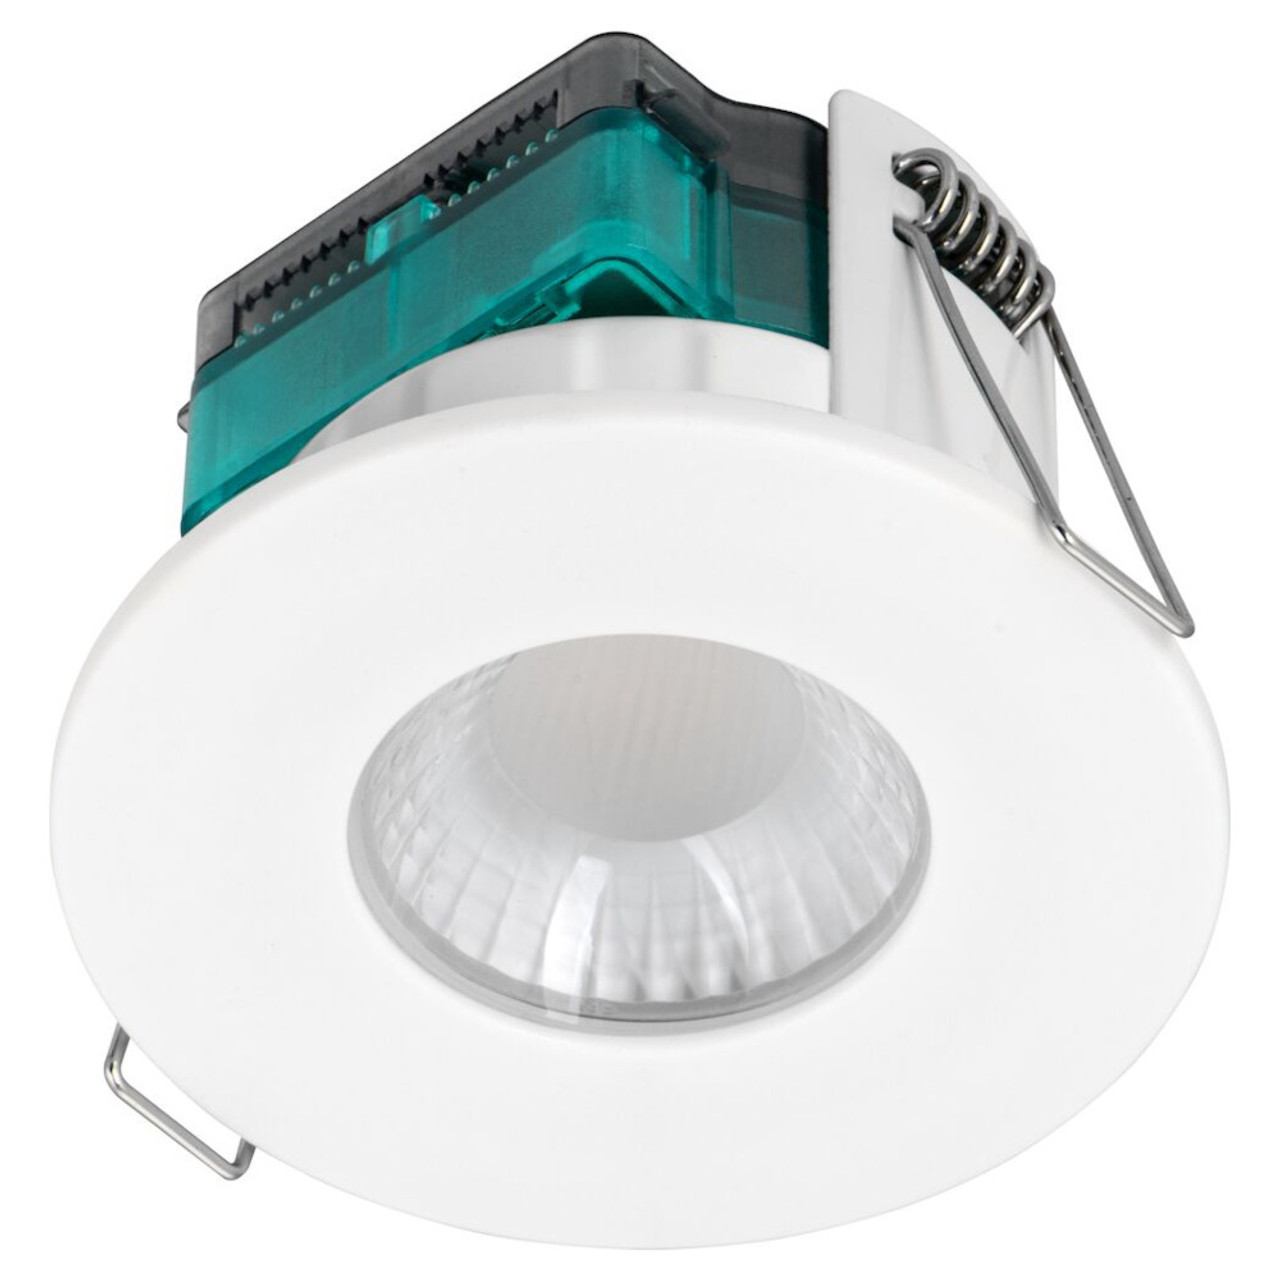 LED Fixed Fire Rated Downlight 5W 550lm 4000K 60 Degrees Phase Dimmable